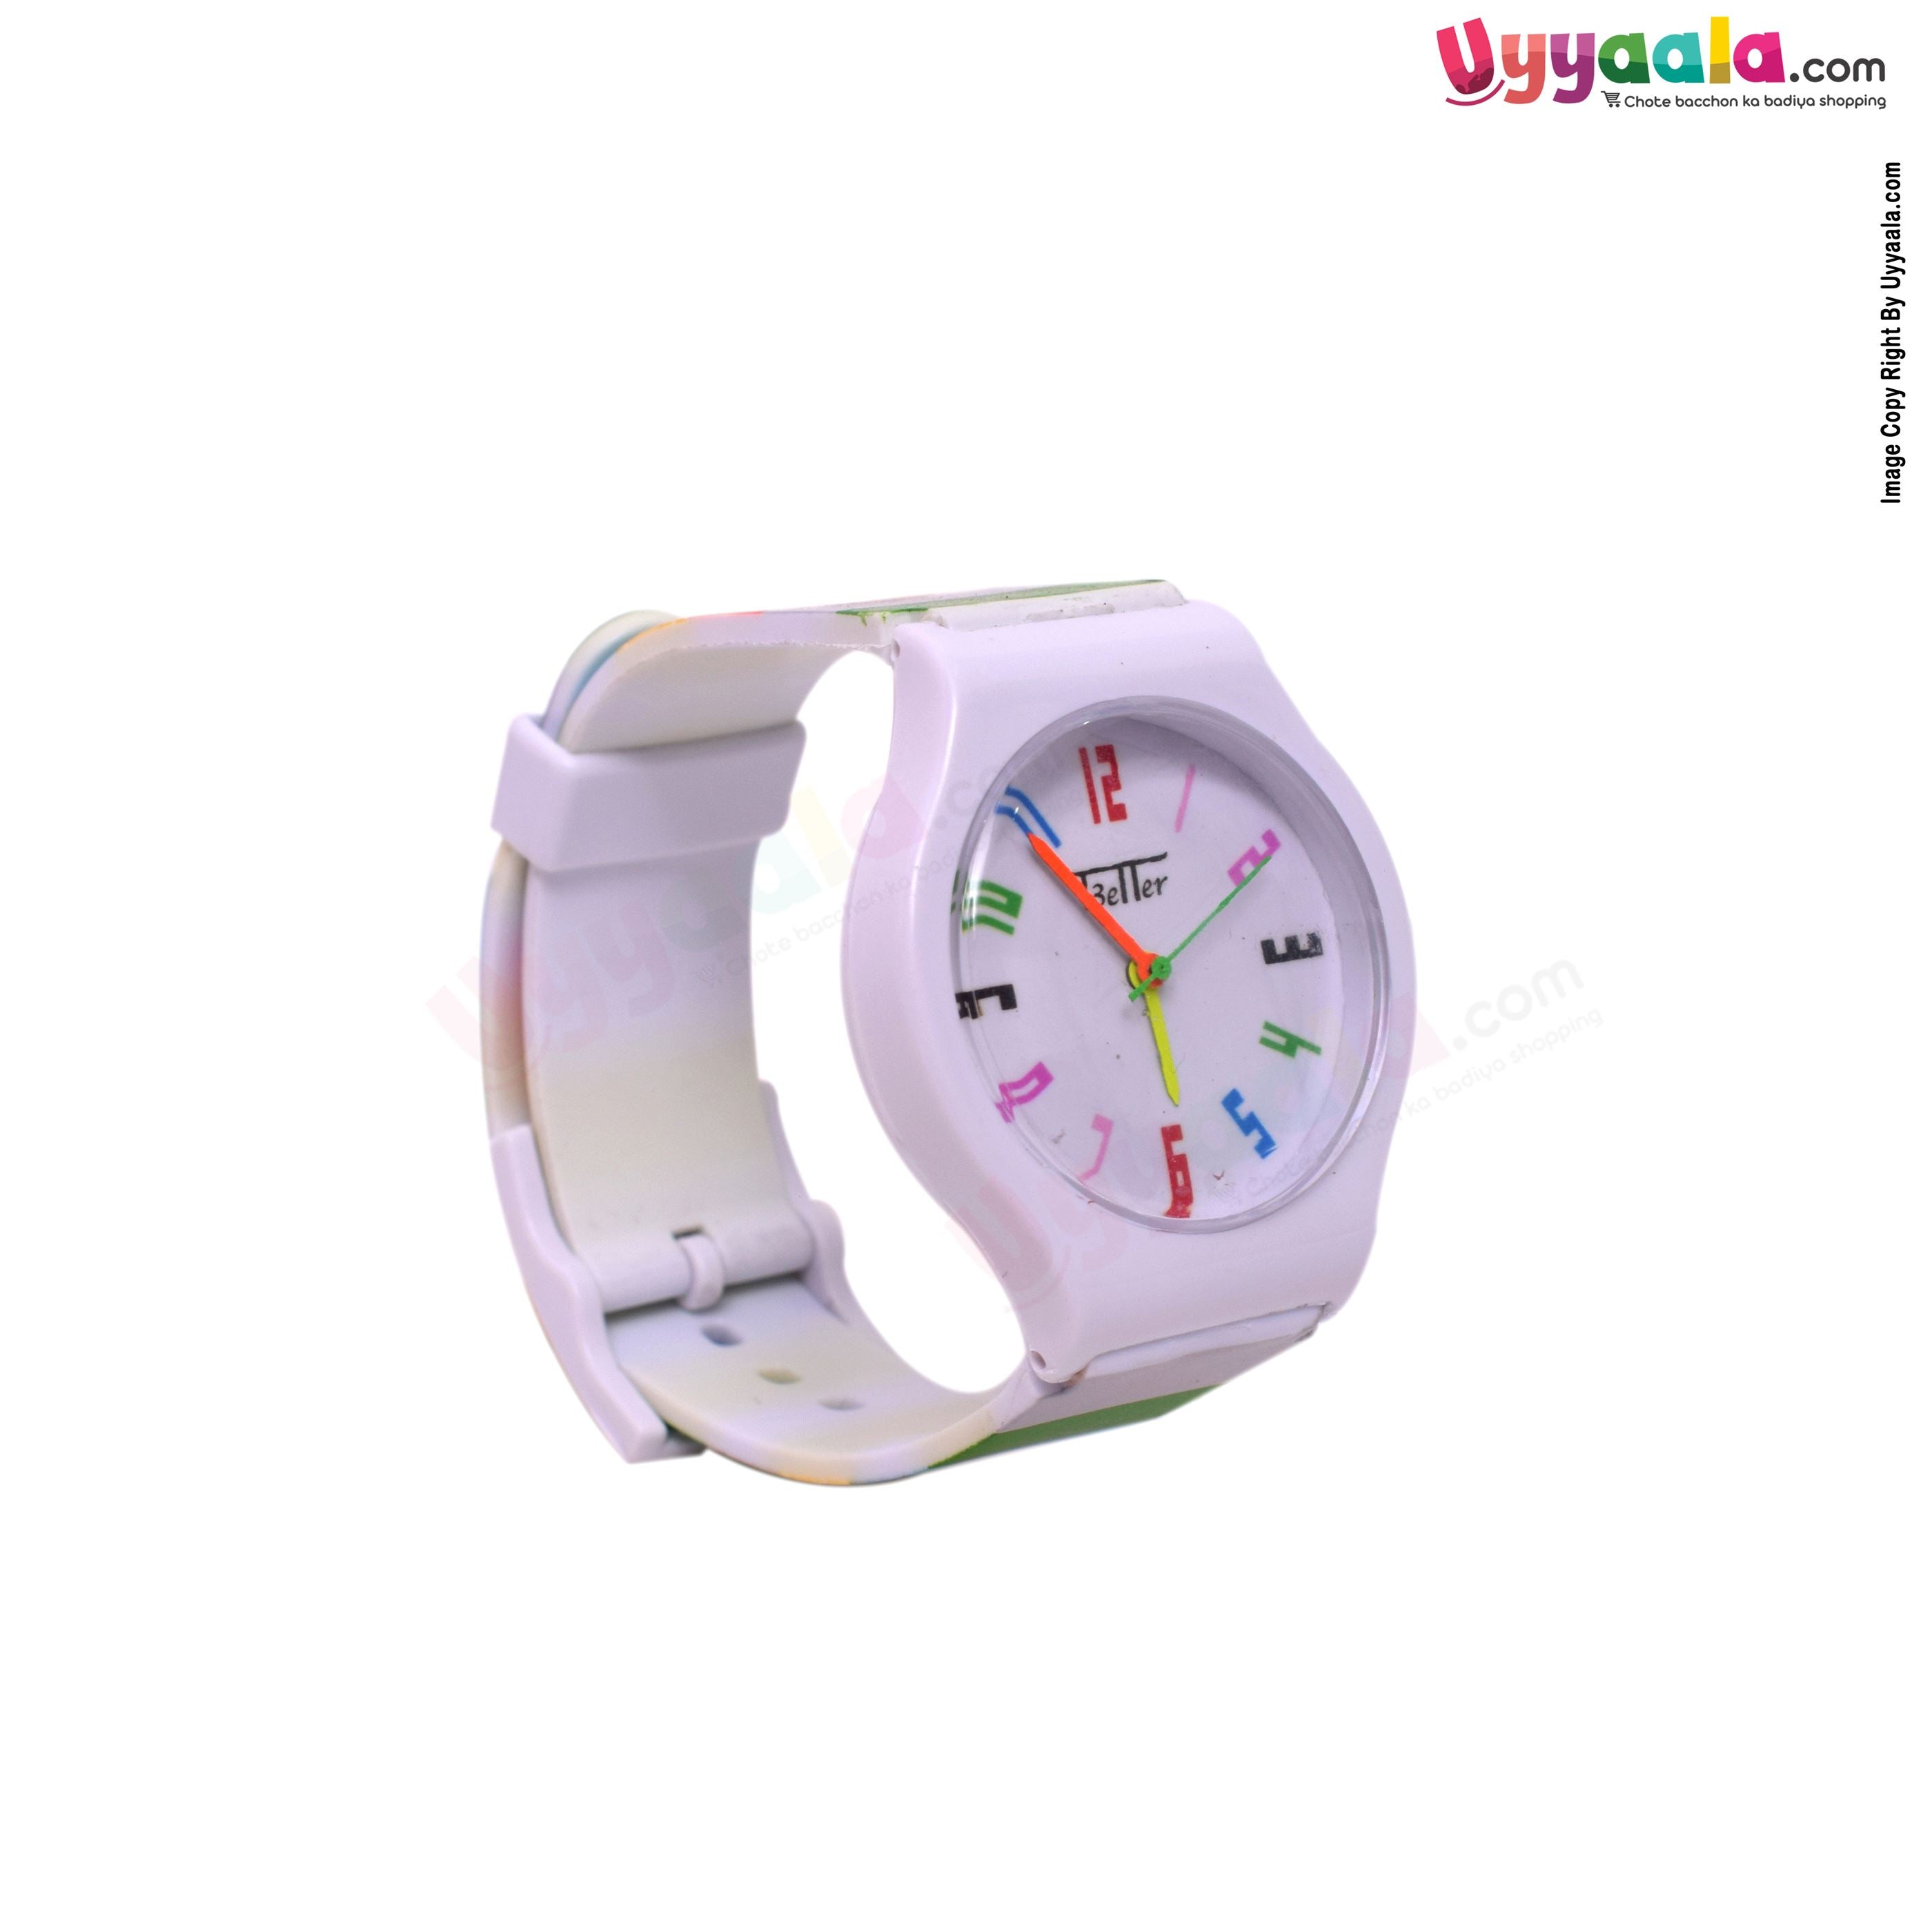 White analog wrist watch for kids - multi color strap